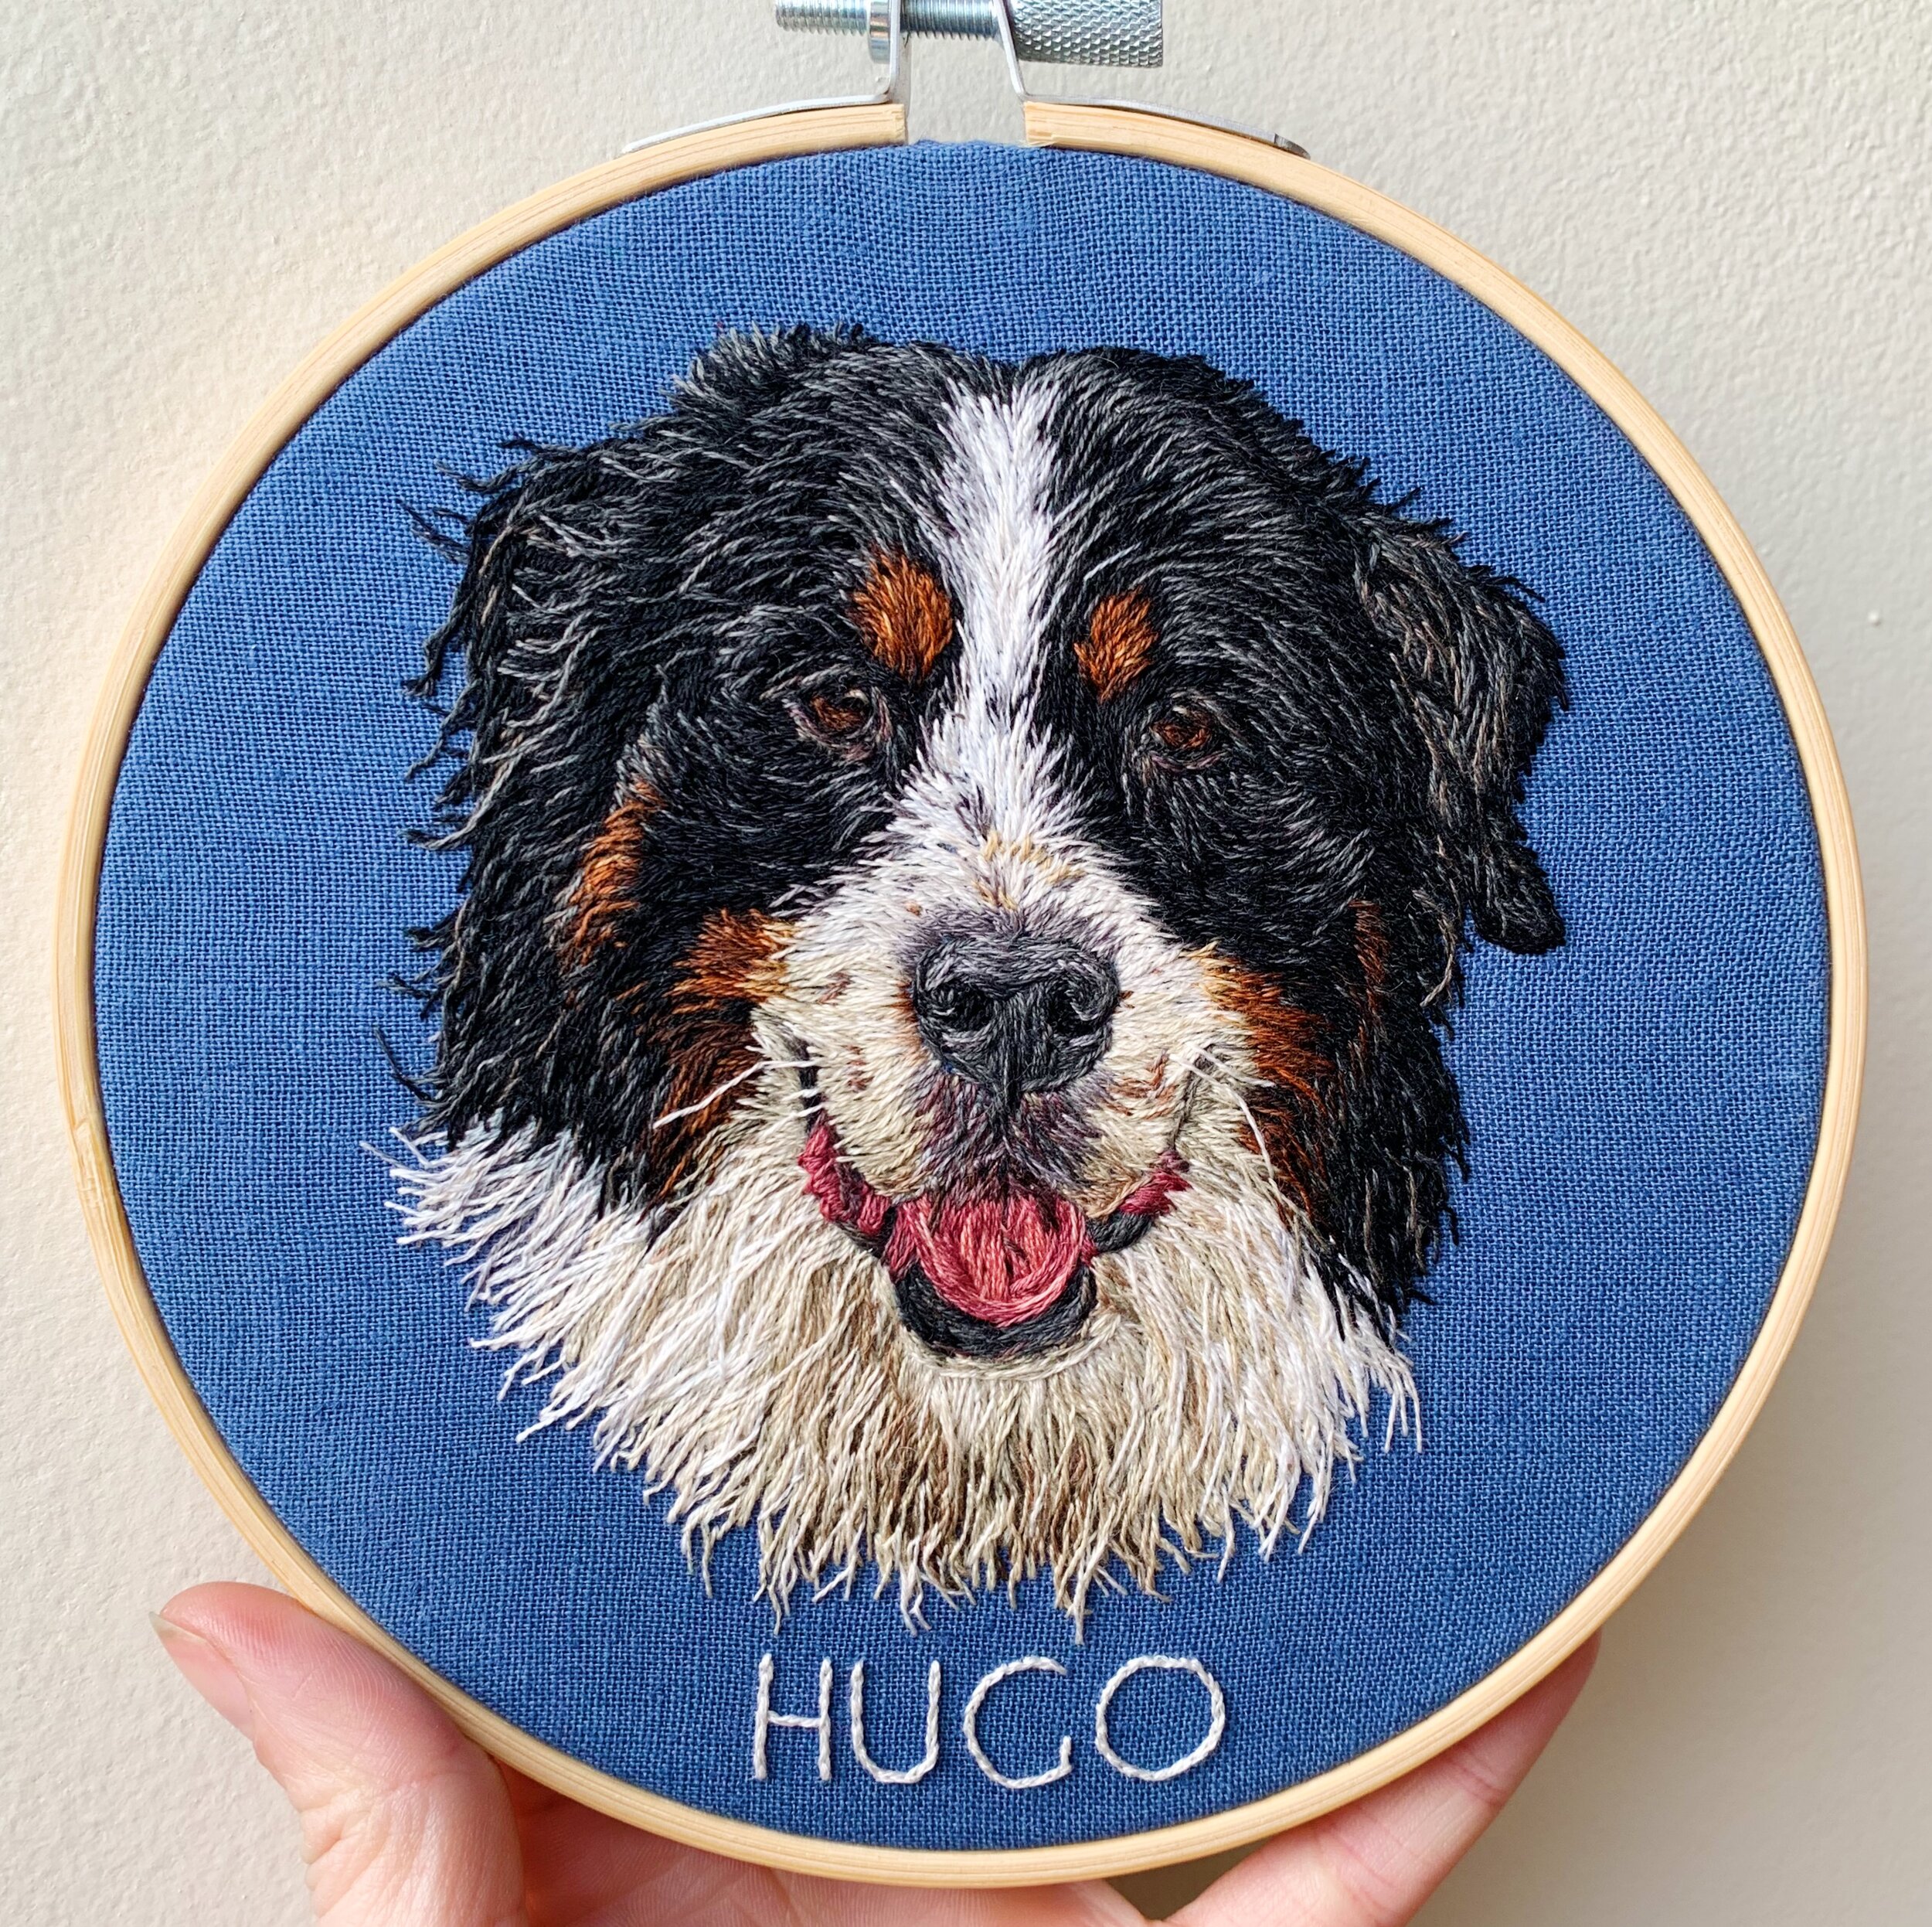 Pet portrait Custom patch Border collie,Hand embroidered Patch Embroidery Dog portrait